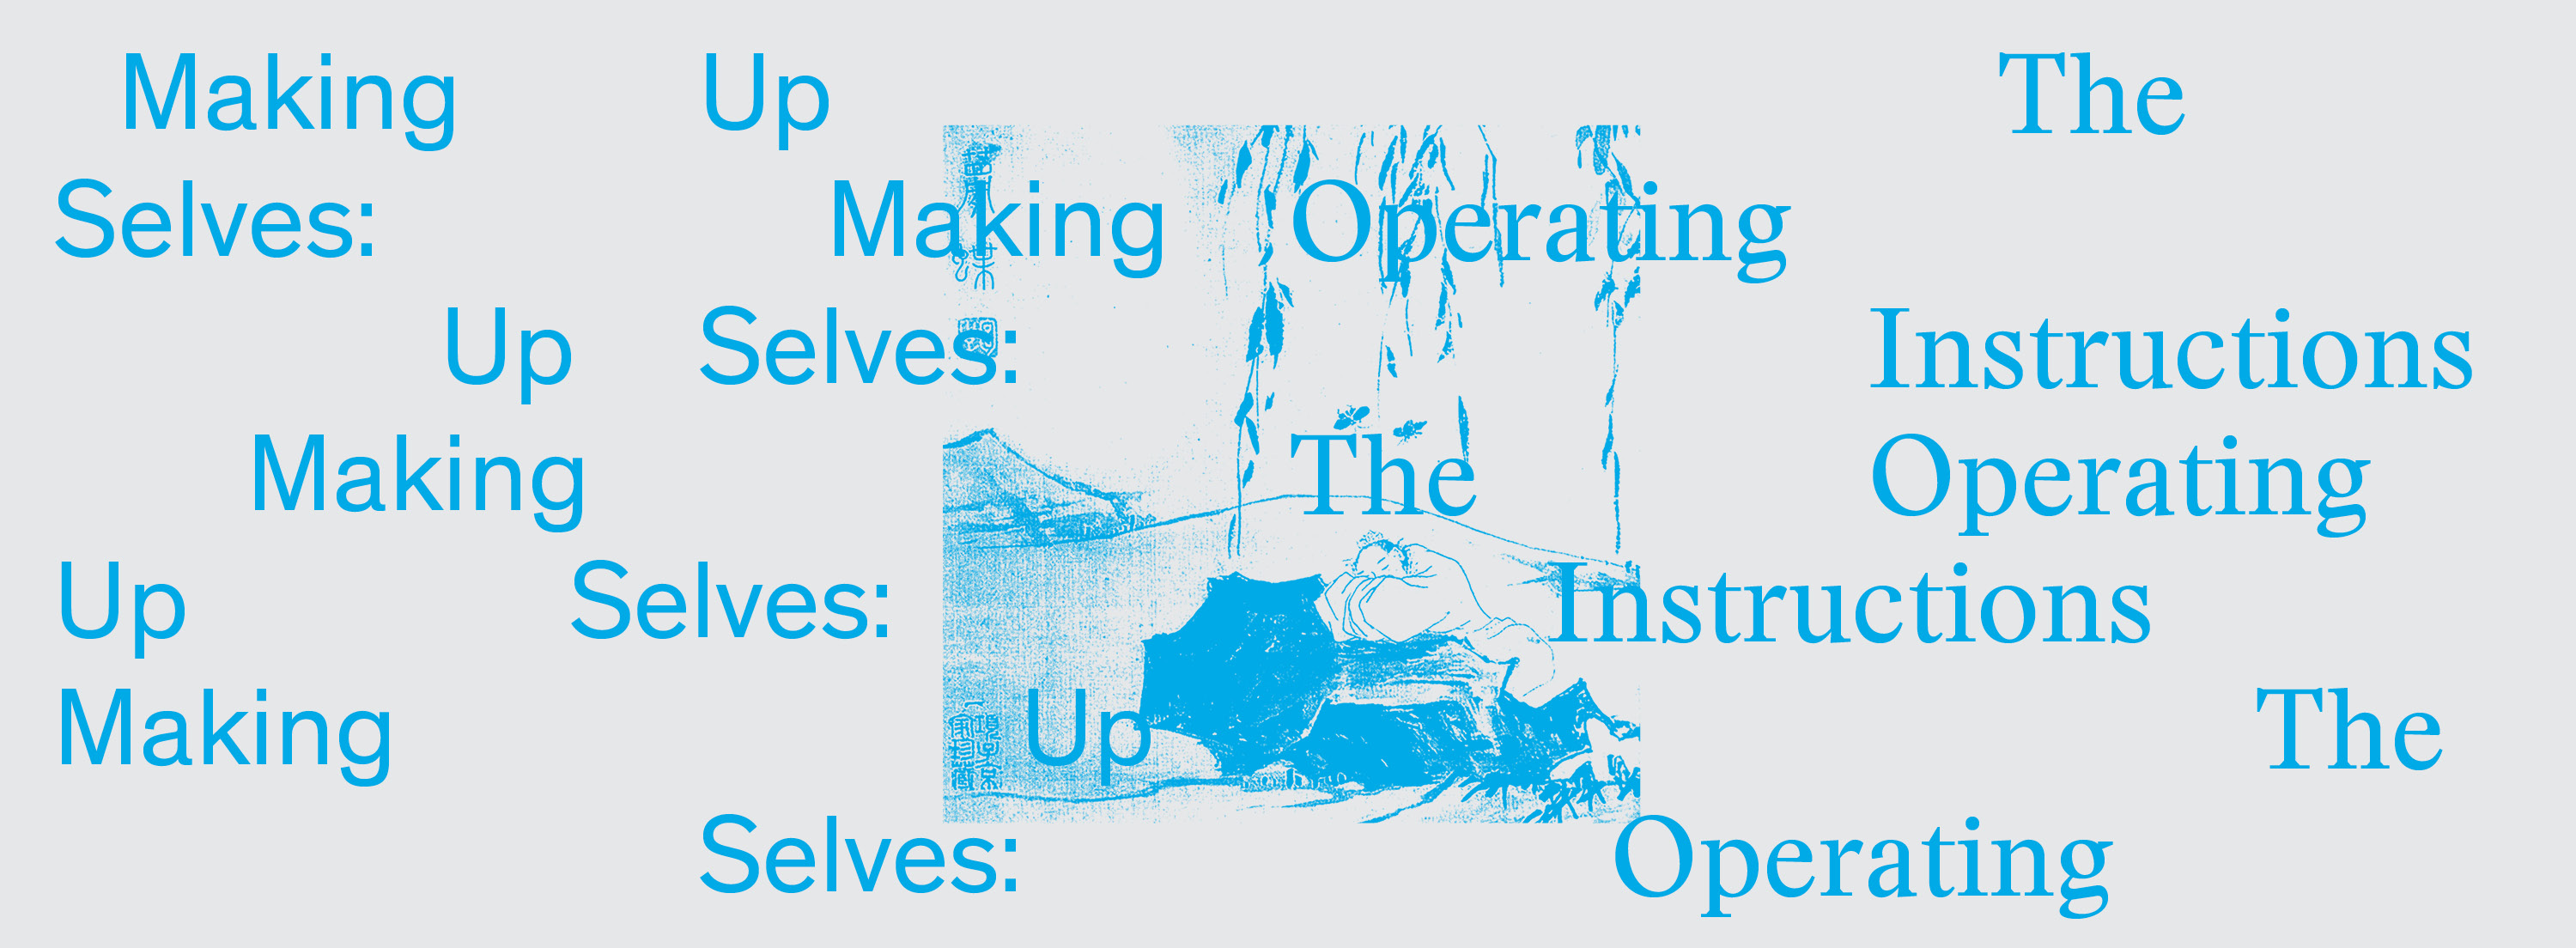 Revisit the “Making Up Selves” Symposium